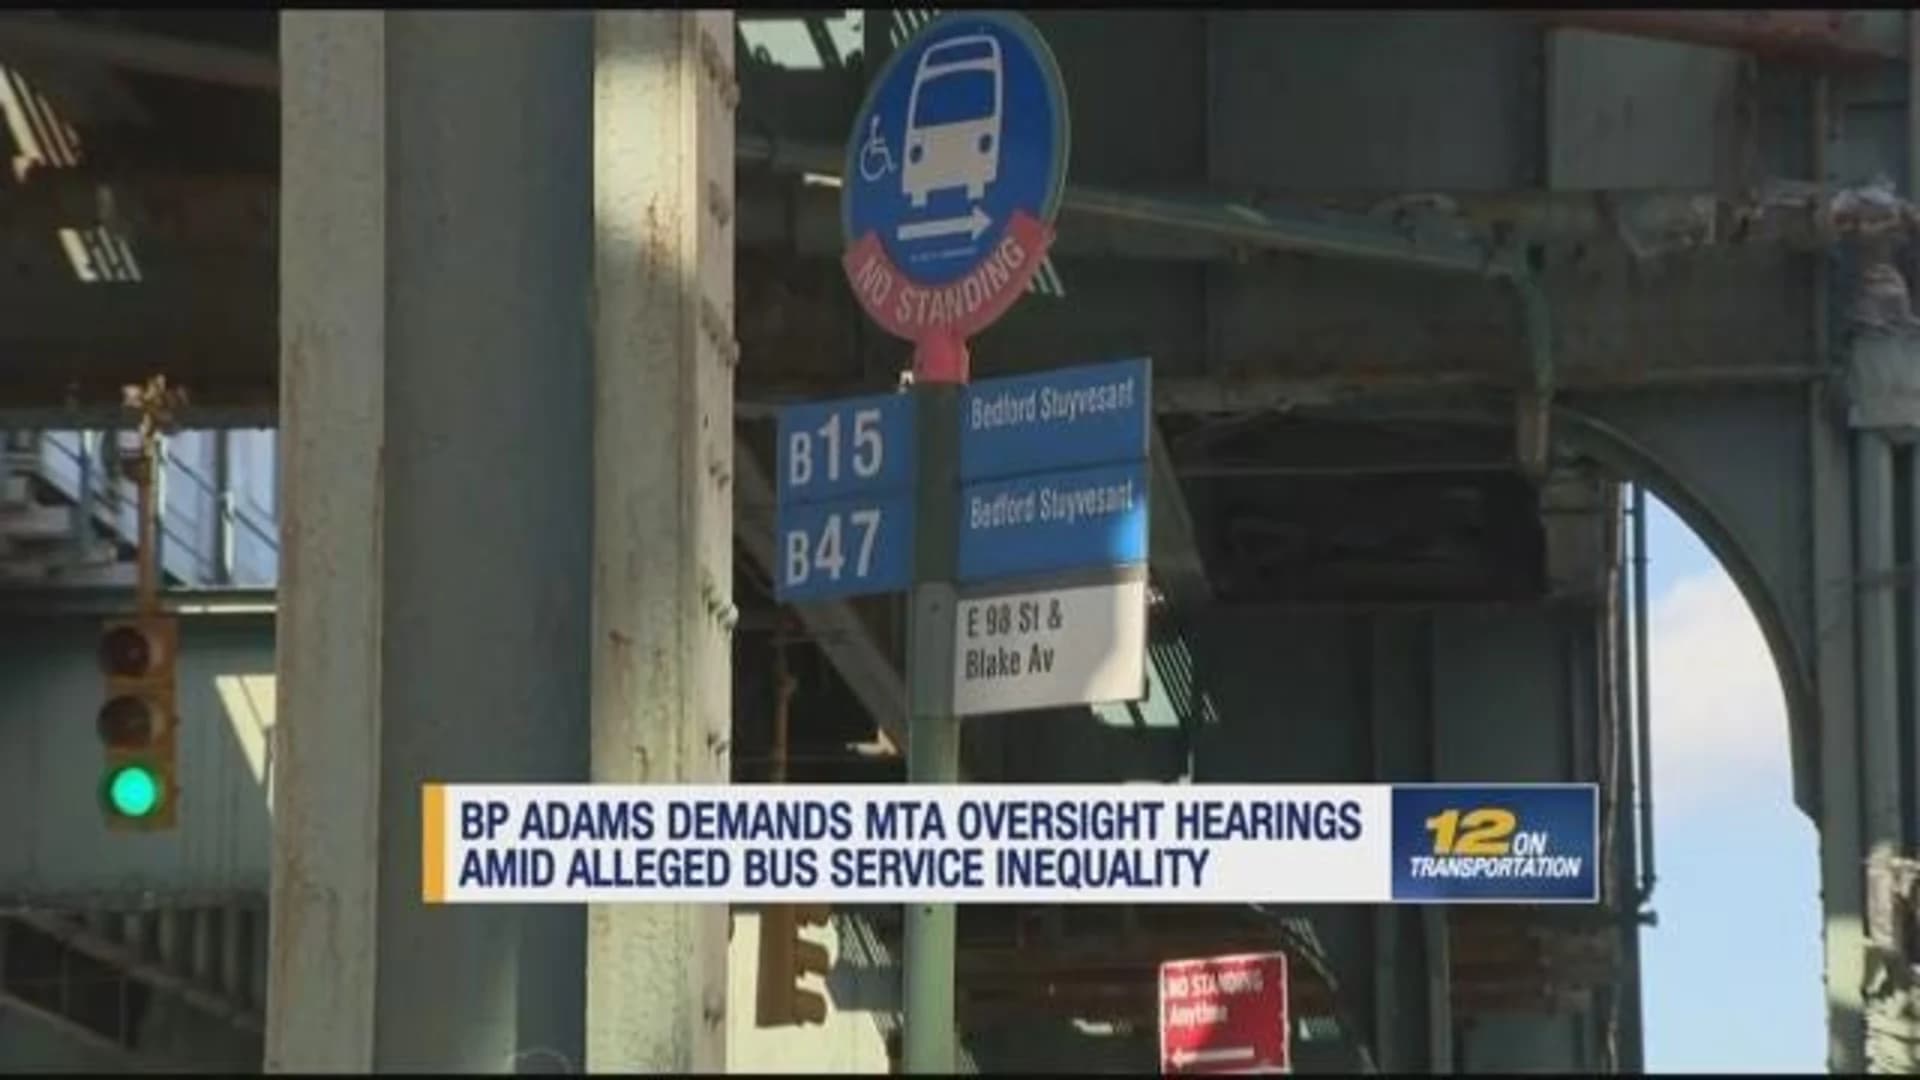 BP Adams demands oversight hearings amid alleged bus service inequality